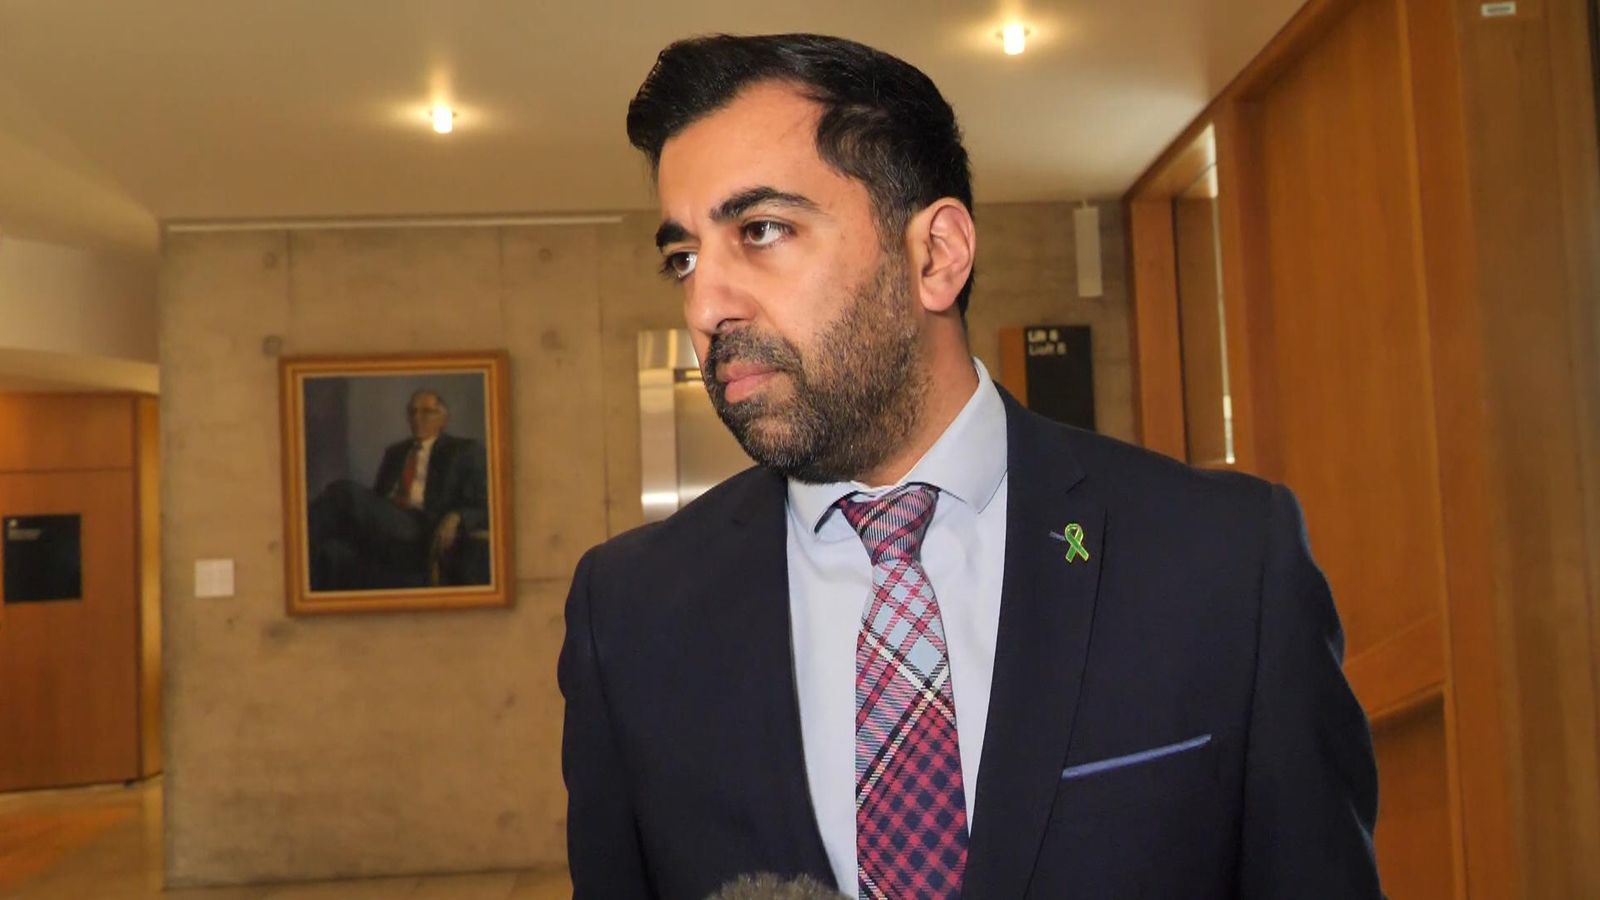 Humza Yousaf tells Sky News he cannot say whether transgender butcher ...